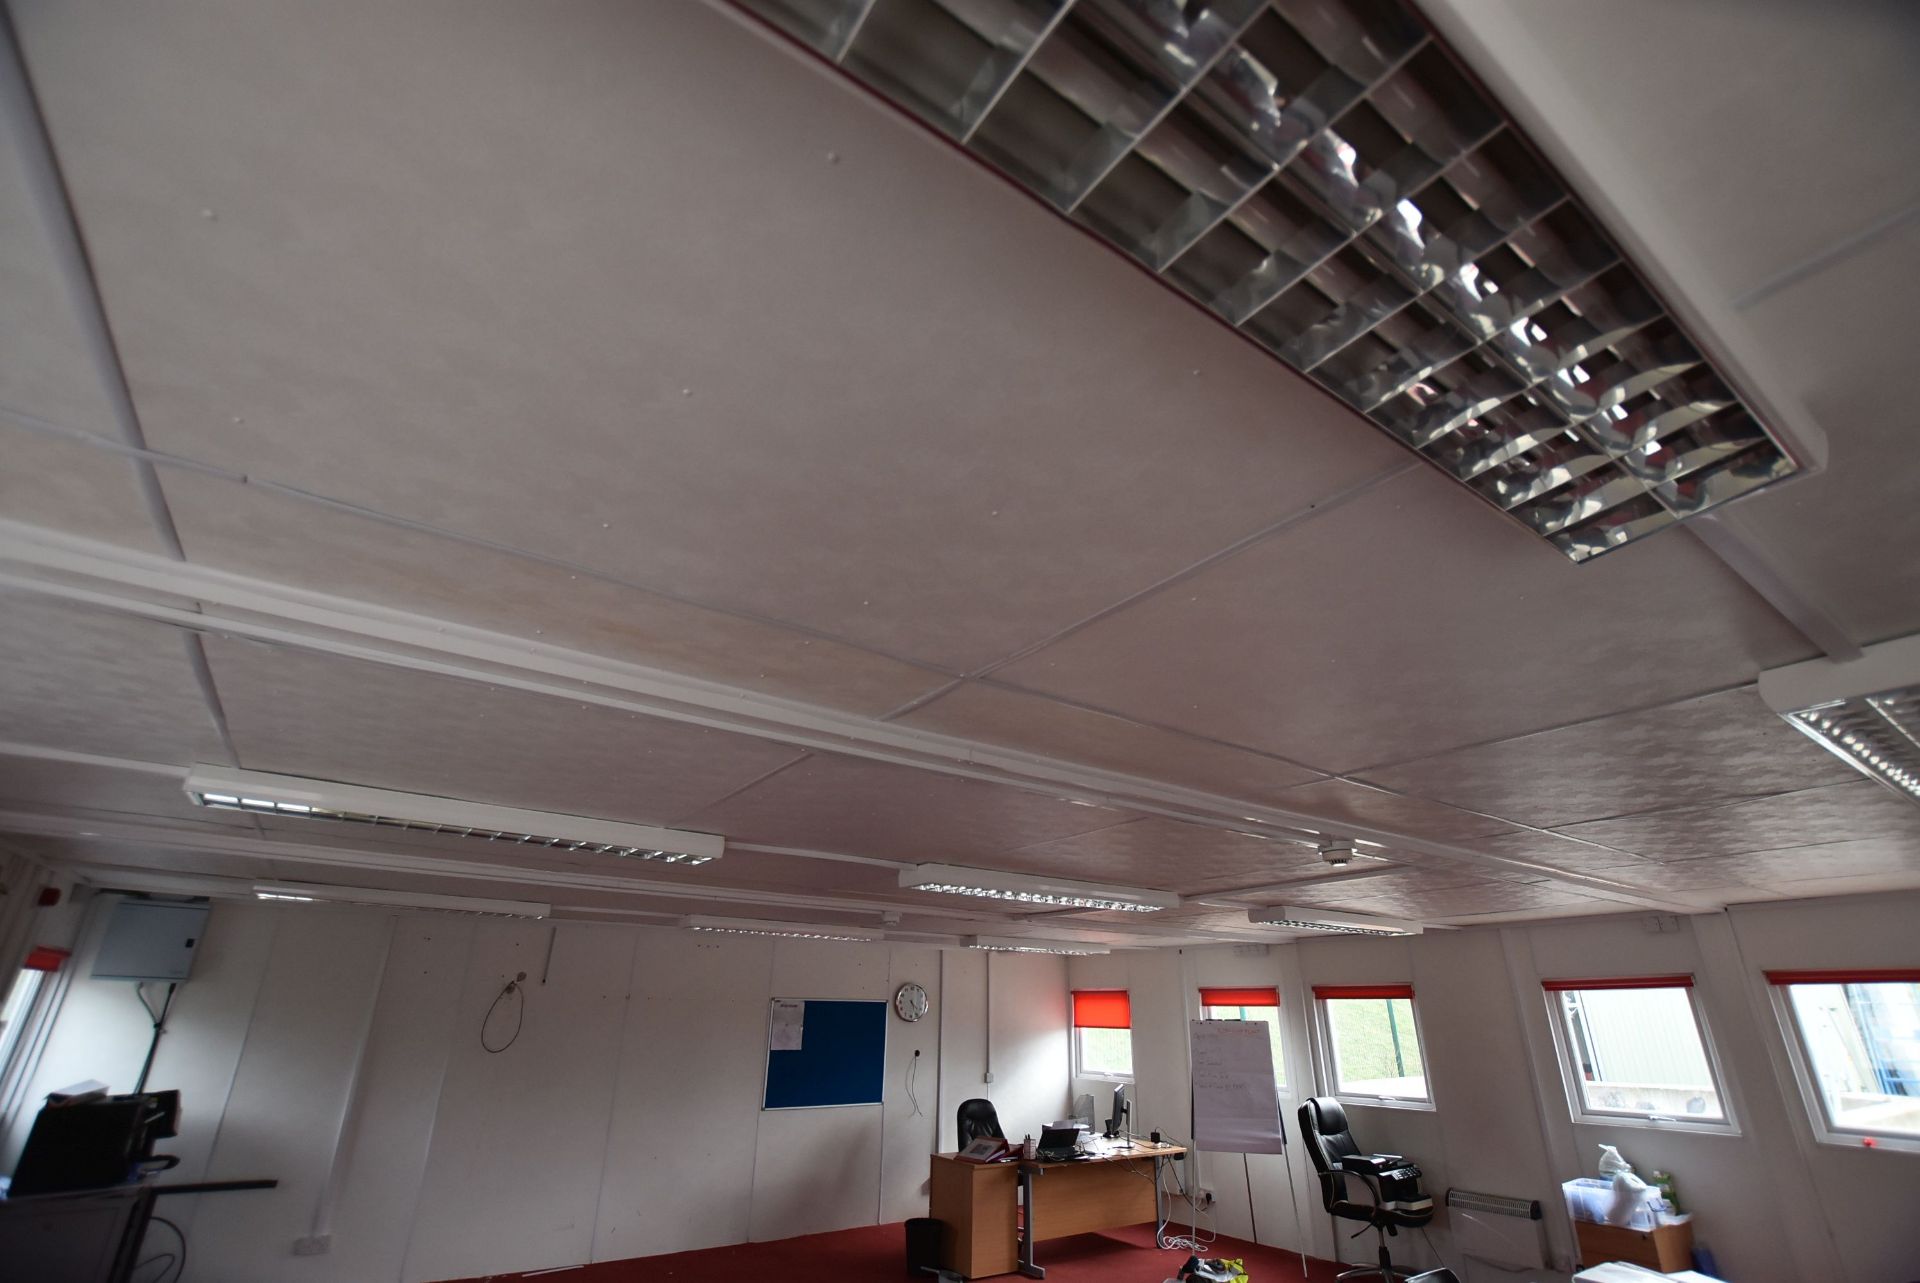 Three Section Office Building, approx. 8.2m x 8.8m (reserve removal), with residual office furniture - Image 6 of 6